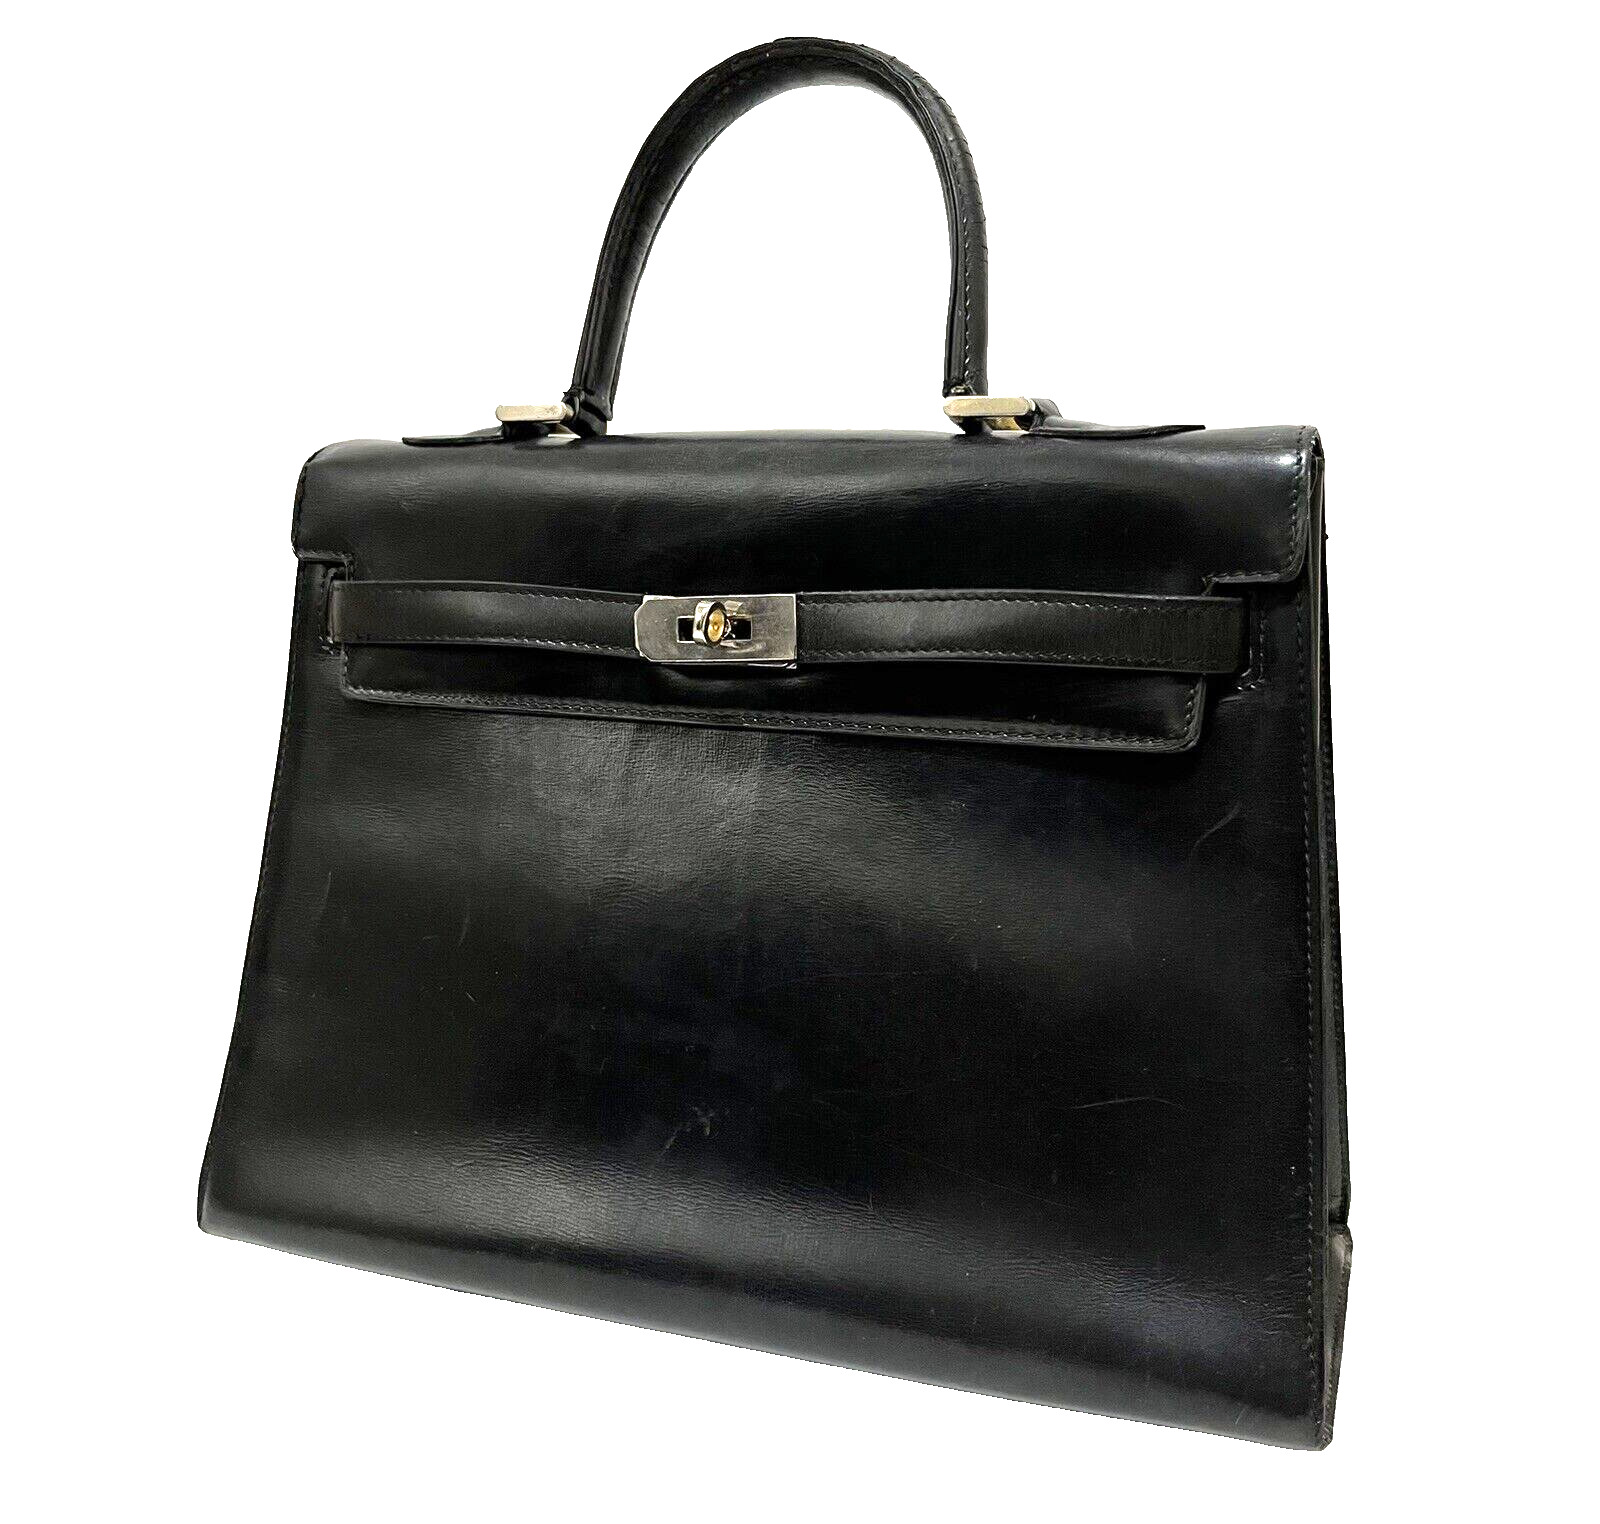 Bally Hand Bag Classic Black Leather Vintage Formal Authentic 0119